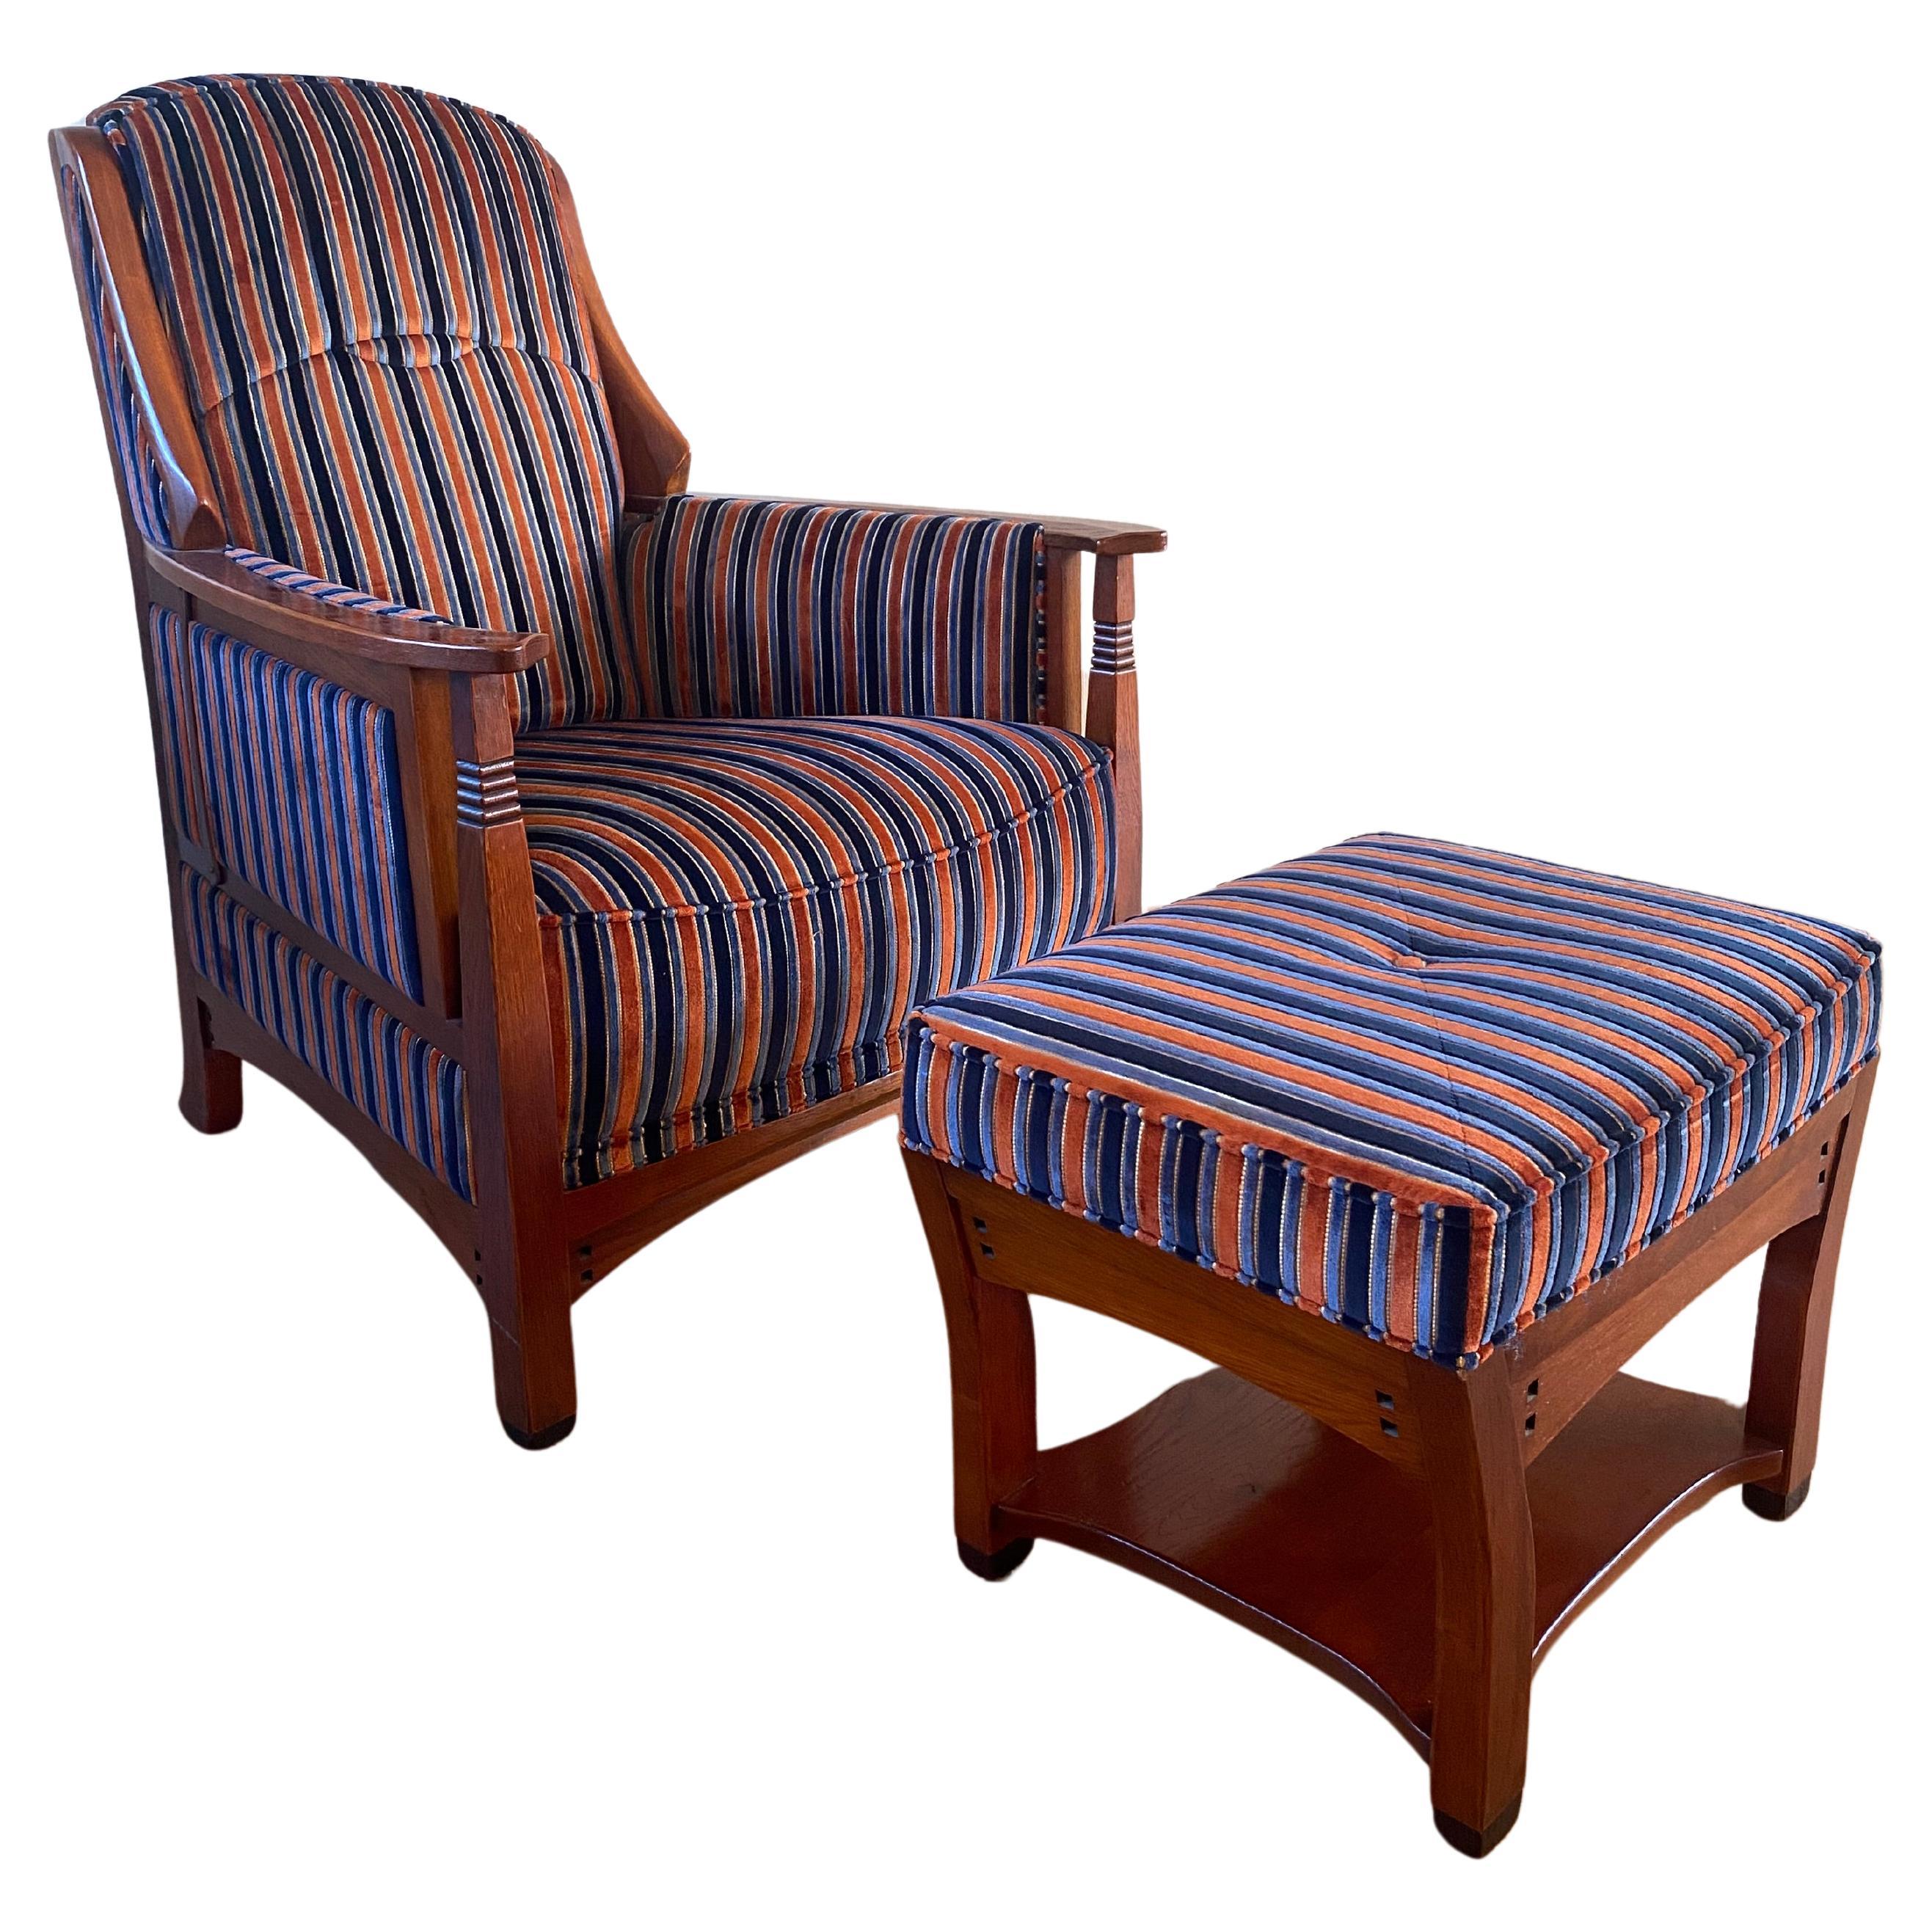 Exclusive Art Deco Style Lounge Chair With Footstool By Schuitema, Model Horta. For Sale